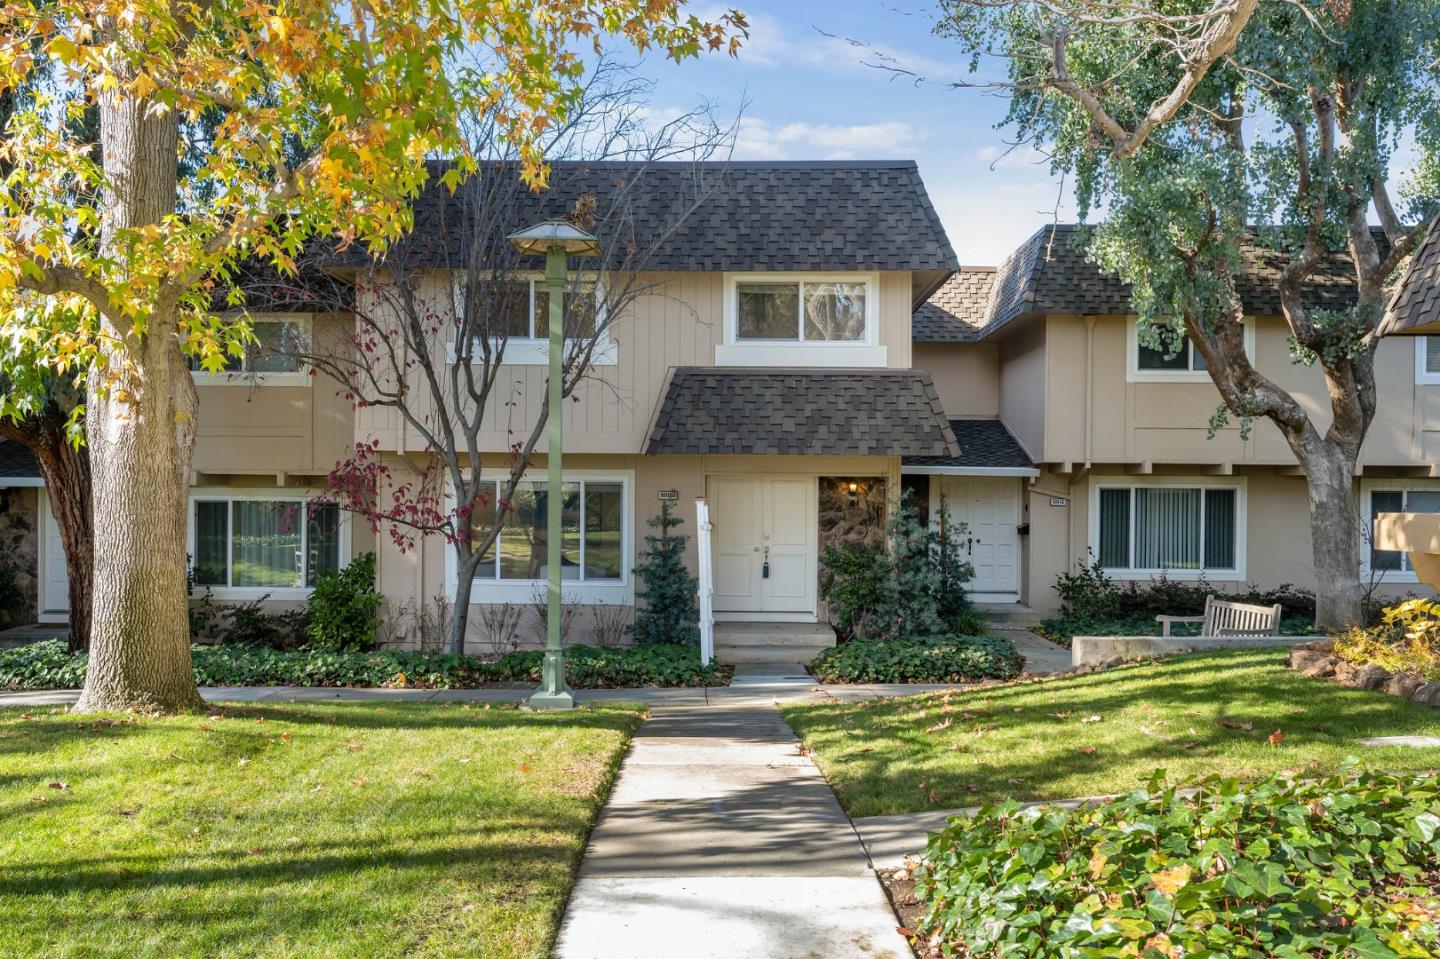 Welcome to this Gorgeous 4 Bedrooms Home with a Modern Farmhouse Inspired Remodel TownHome. Located in a quiet cul-de-sac within one of Cupertino's finest communities, Westridge. Top Performing Stevens Creek ES API - 972 (99%), Kennedy MS API - 986 (99%) & Monta Vista High API - 956 (99%) Tastefully renovated kitchen boasts white-finished cabinetry, granite countertops, SS appliances, and large pantry storage. Spacious Master Bedroom features an-suite bath. Remodeled baths, gleaming new flooring throughout & recessed lighting.. Modern, Zoned AC & Heat System. Spacious interior laundry room, Oversized detached Two car garage. Enjoy any time of year in your private backyard. Views of the foothills! A friendly community w/ LOW HOA & resort-like community: large pool & newly renovated clubhouse. Enjoy nearby parks, Whole Foods, Target, Cupertino Main Street. Quick commute to Silicon Valley employers!